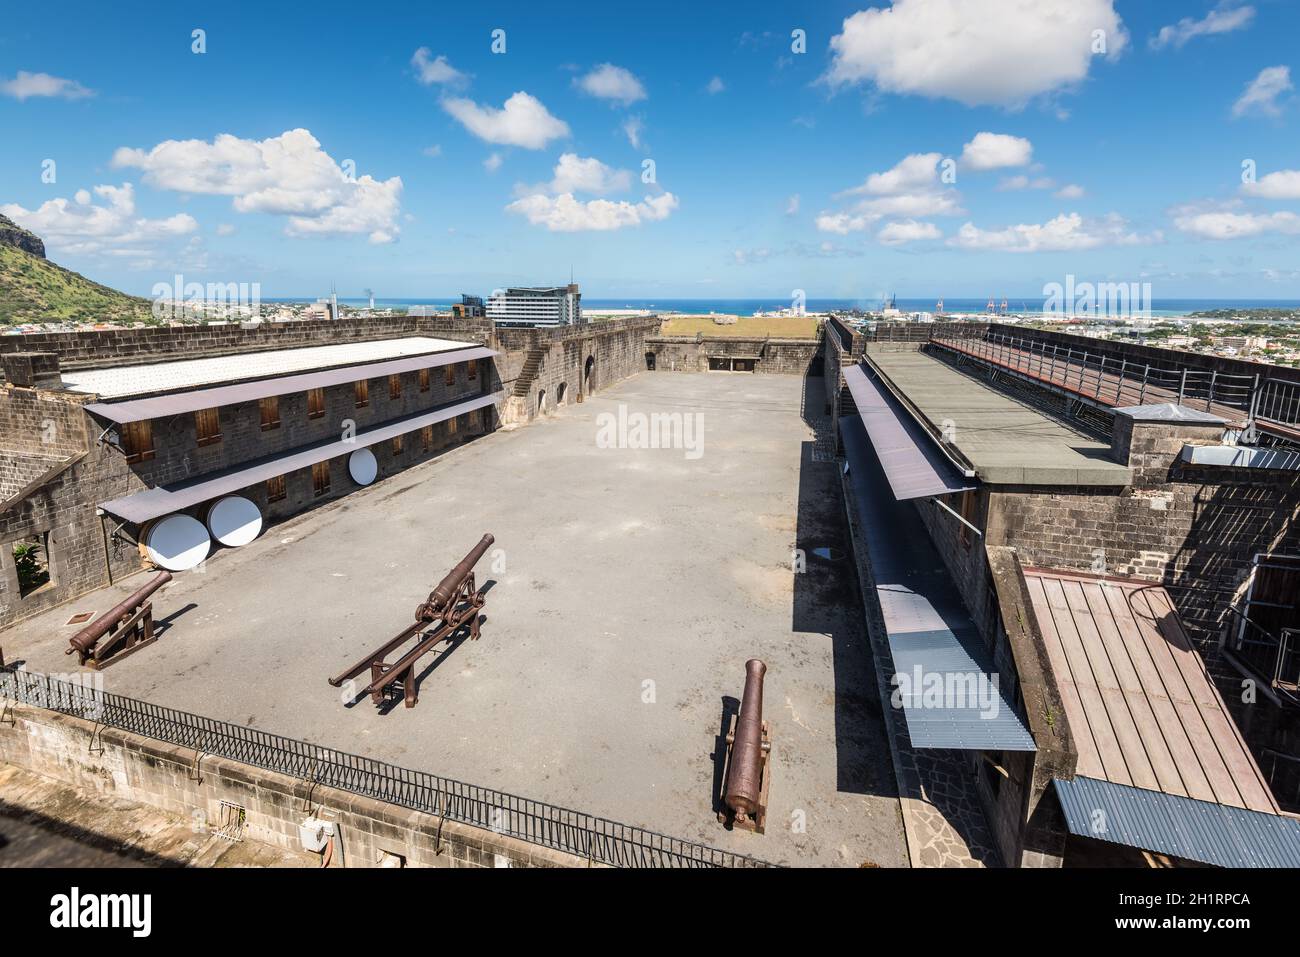 Port Louis, Mauritius - December 25, 2015: Fort Adelaide overlooking the  city of Port Louis, Mauritius capital city. The fortress dates back from  the Stock Photo - Alamy